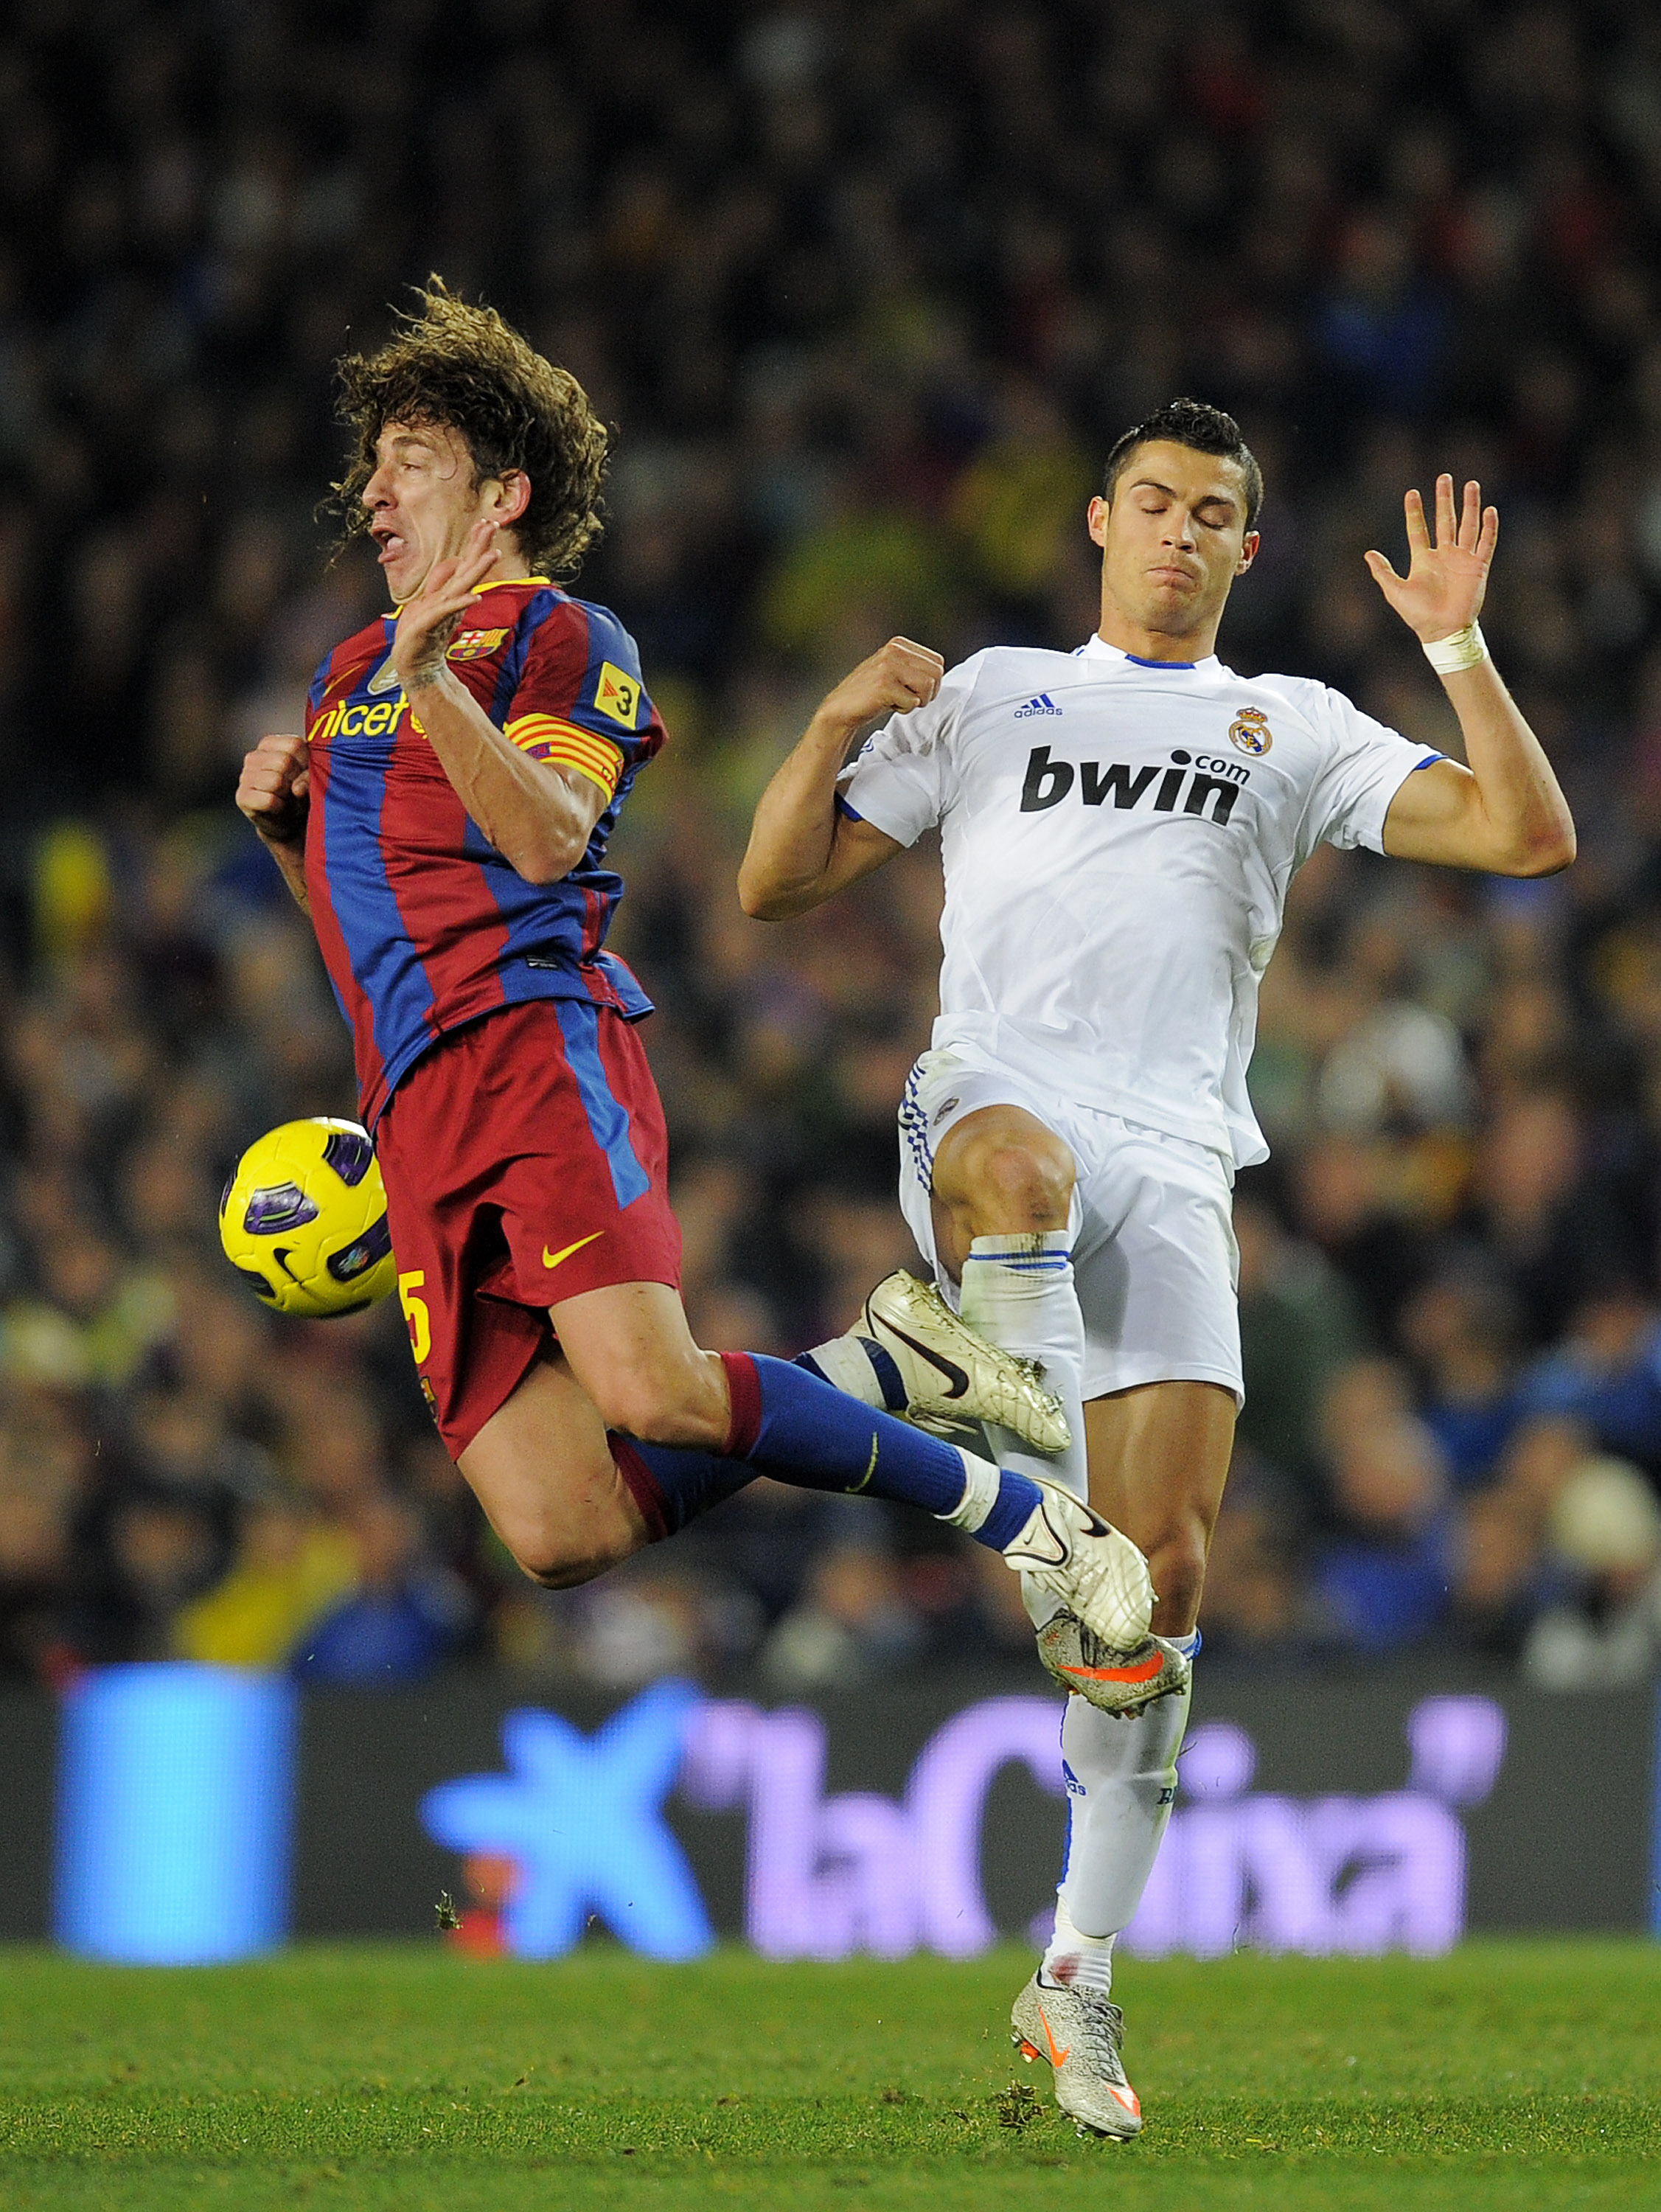 BARCELONA, SPAIN - NOVEMBER 29:  Carles Puyol of Barcelona (L) vies for the ball with Cristiano Ronaldo of Real Madrid during the La Liga match between Barcelona and Real Madrid at the Camp Nou Stadium on November 29, 2010 in Barcelona, Spain.  Barcelona